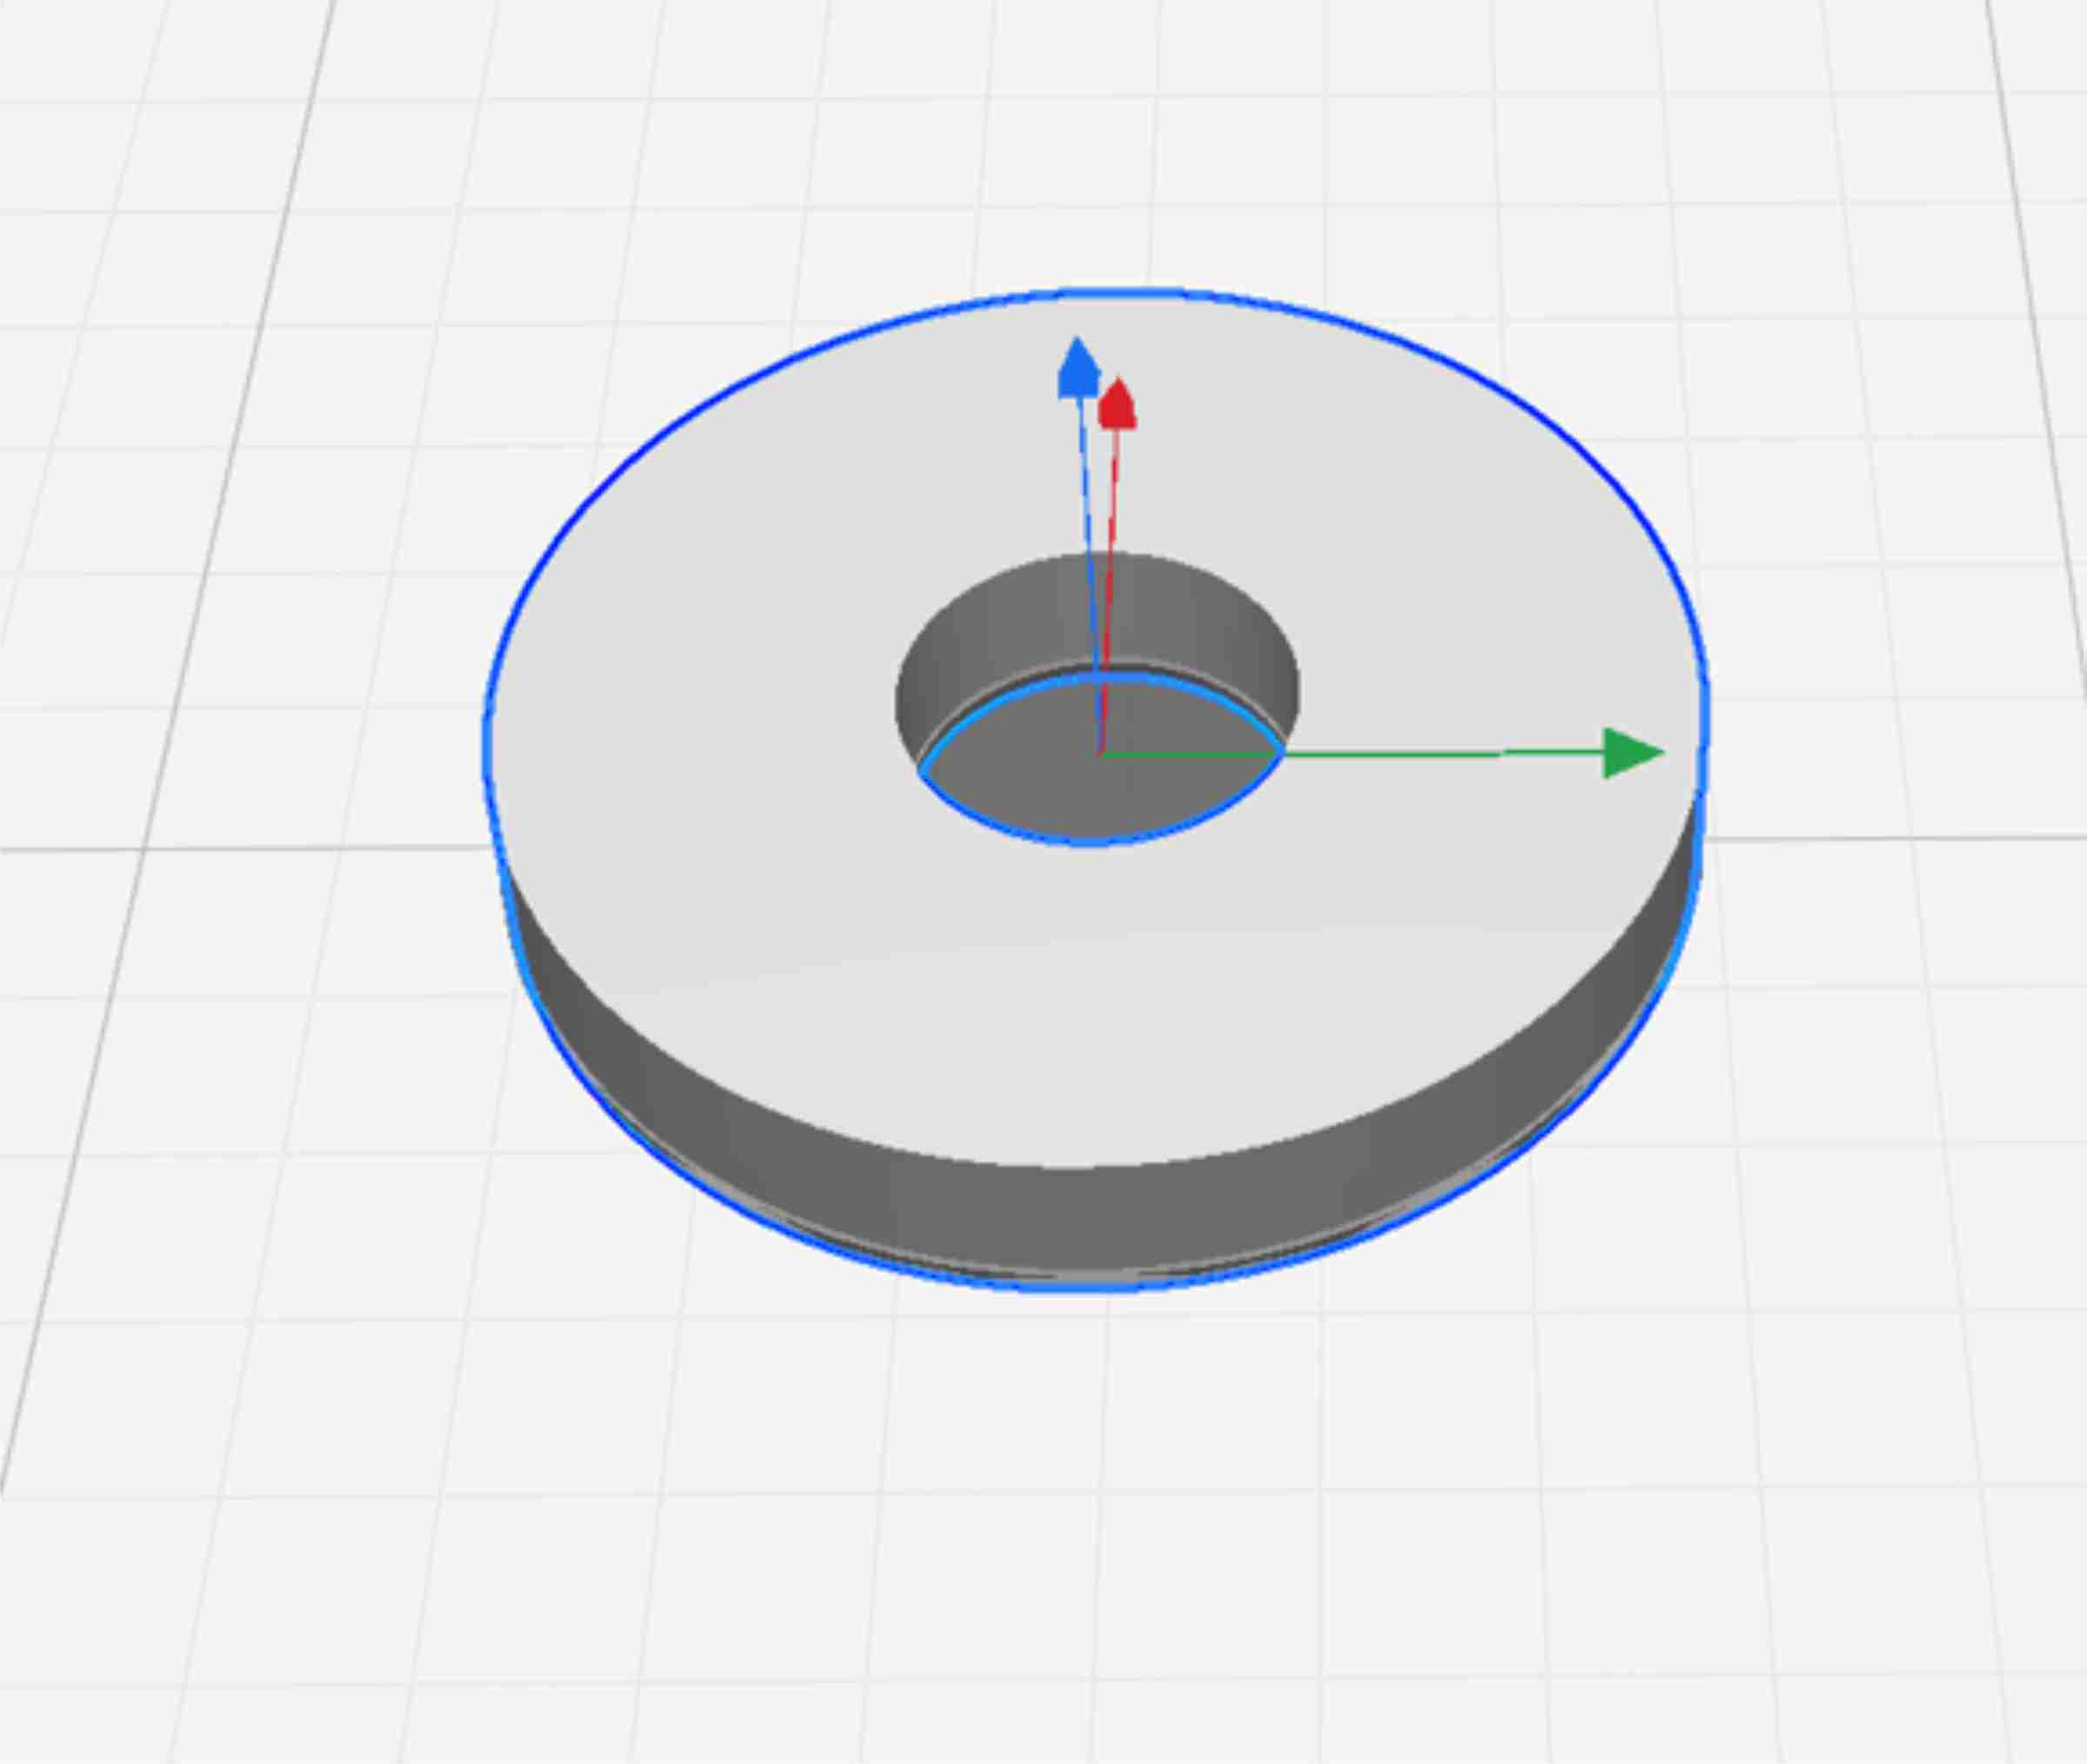 3D printable washer to be used with a #0 x 3/8 truss head screw.